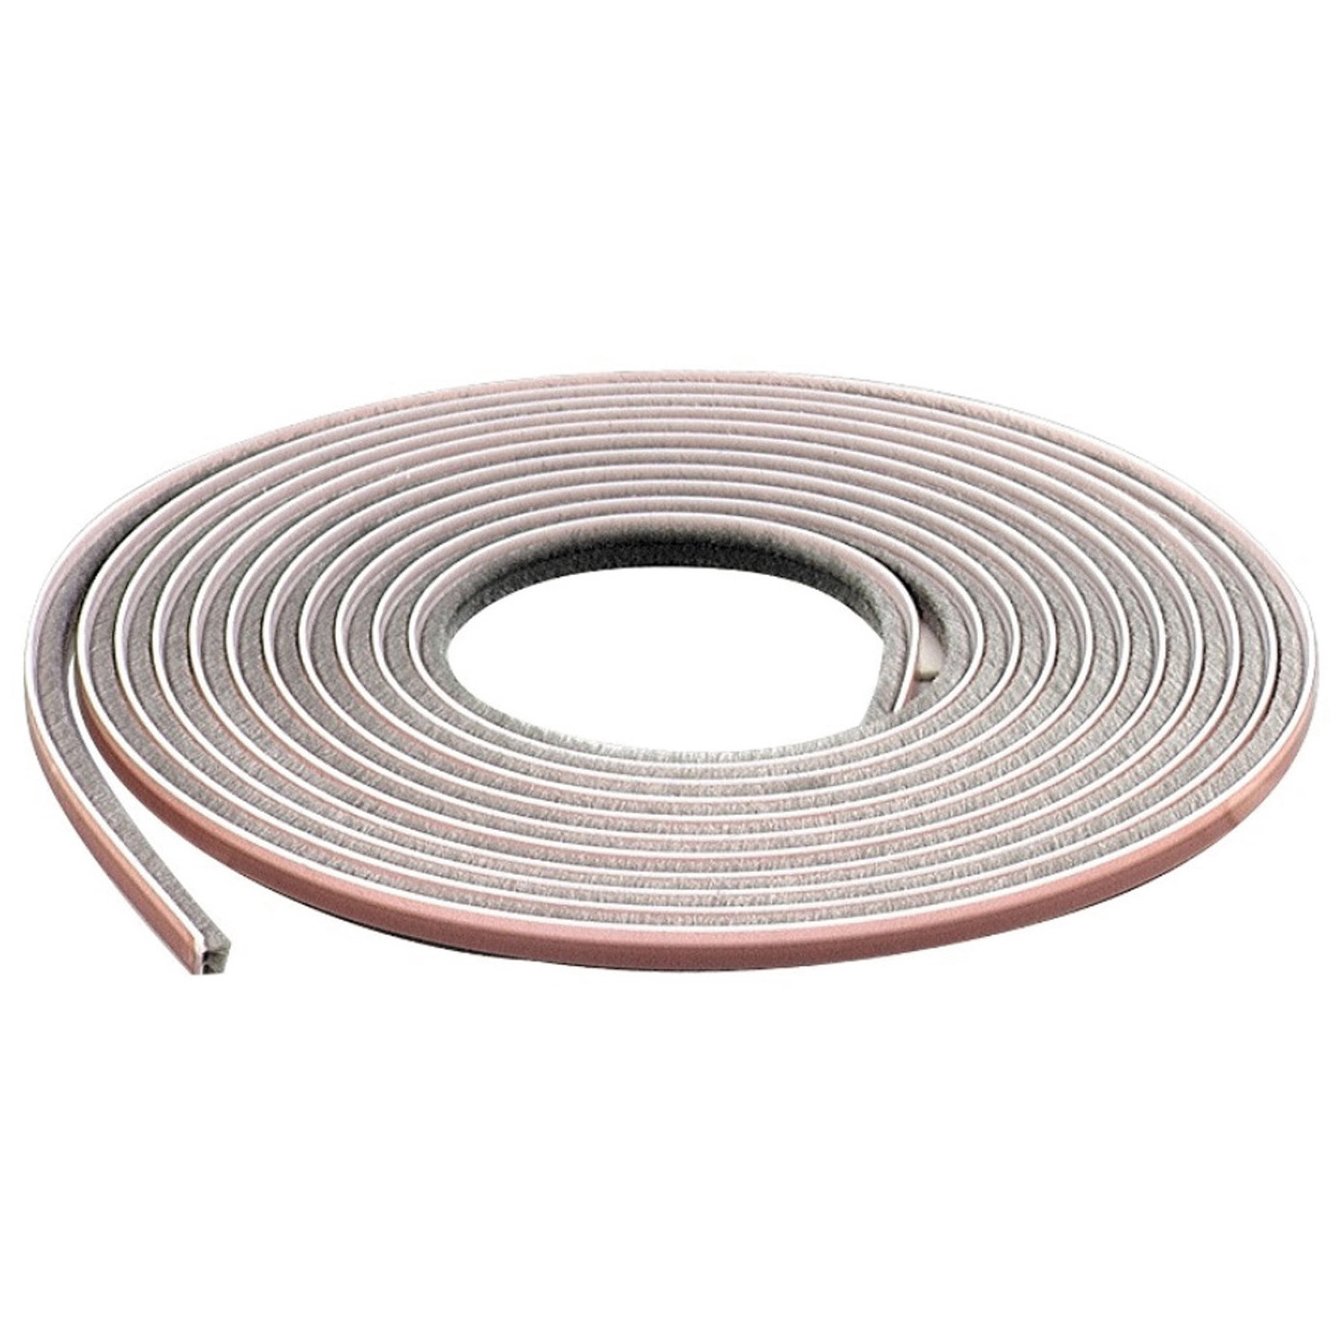 M-D Building Products 04267 Replacement Pile Weatherstrip for Storm Doors and Windows 7/32 in. x 1/4 in. x 17 ft. - image 2 of 2